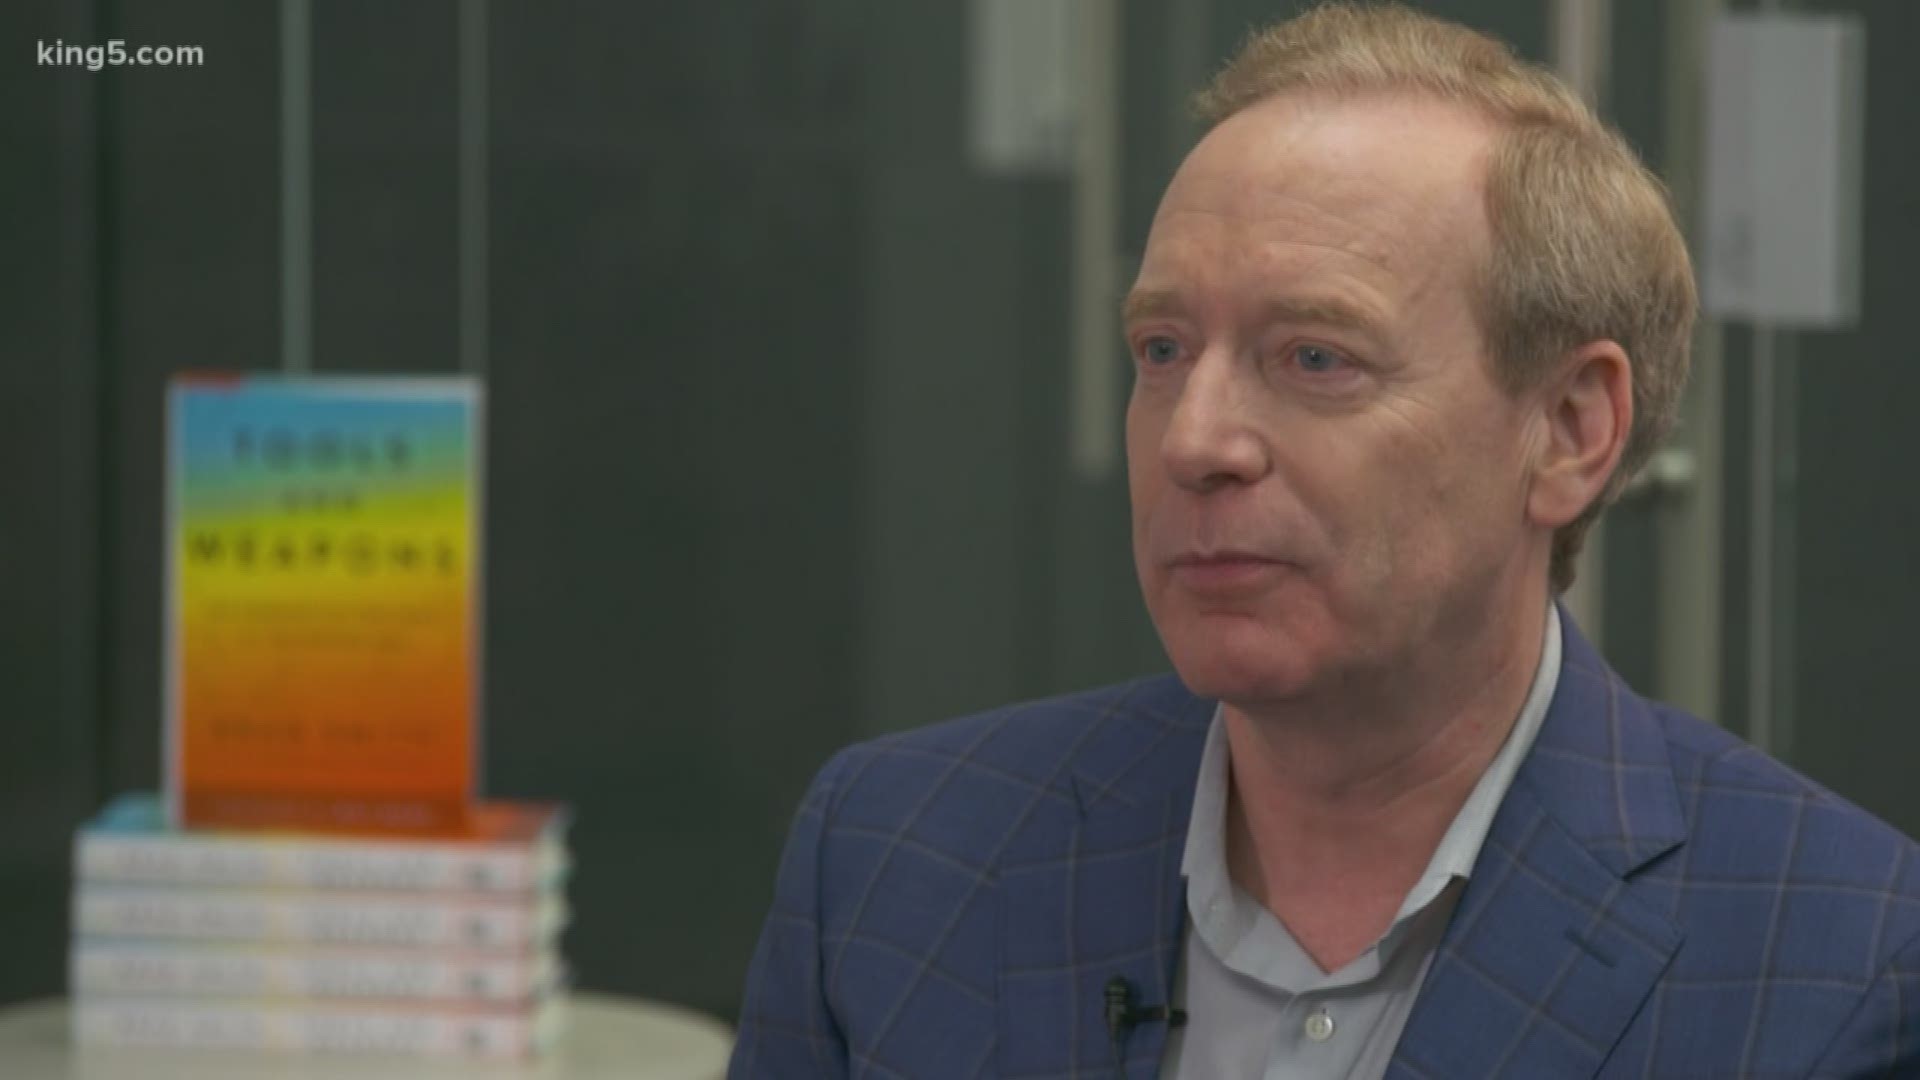 Microsoft President Brad Smith talks about his new book "Tools and Weapons" and what worries him about artificial intelligence.